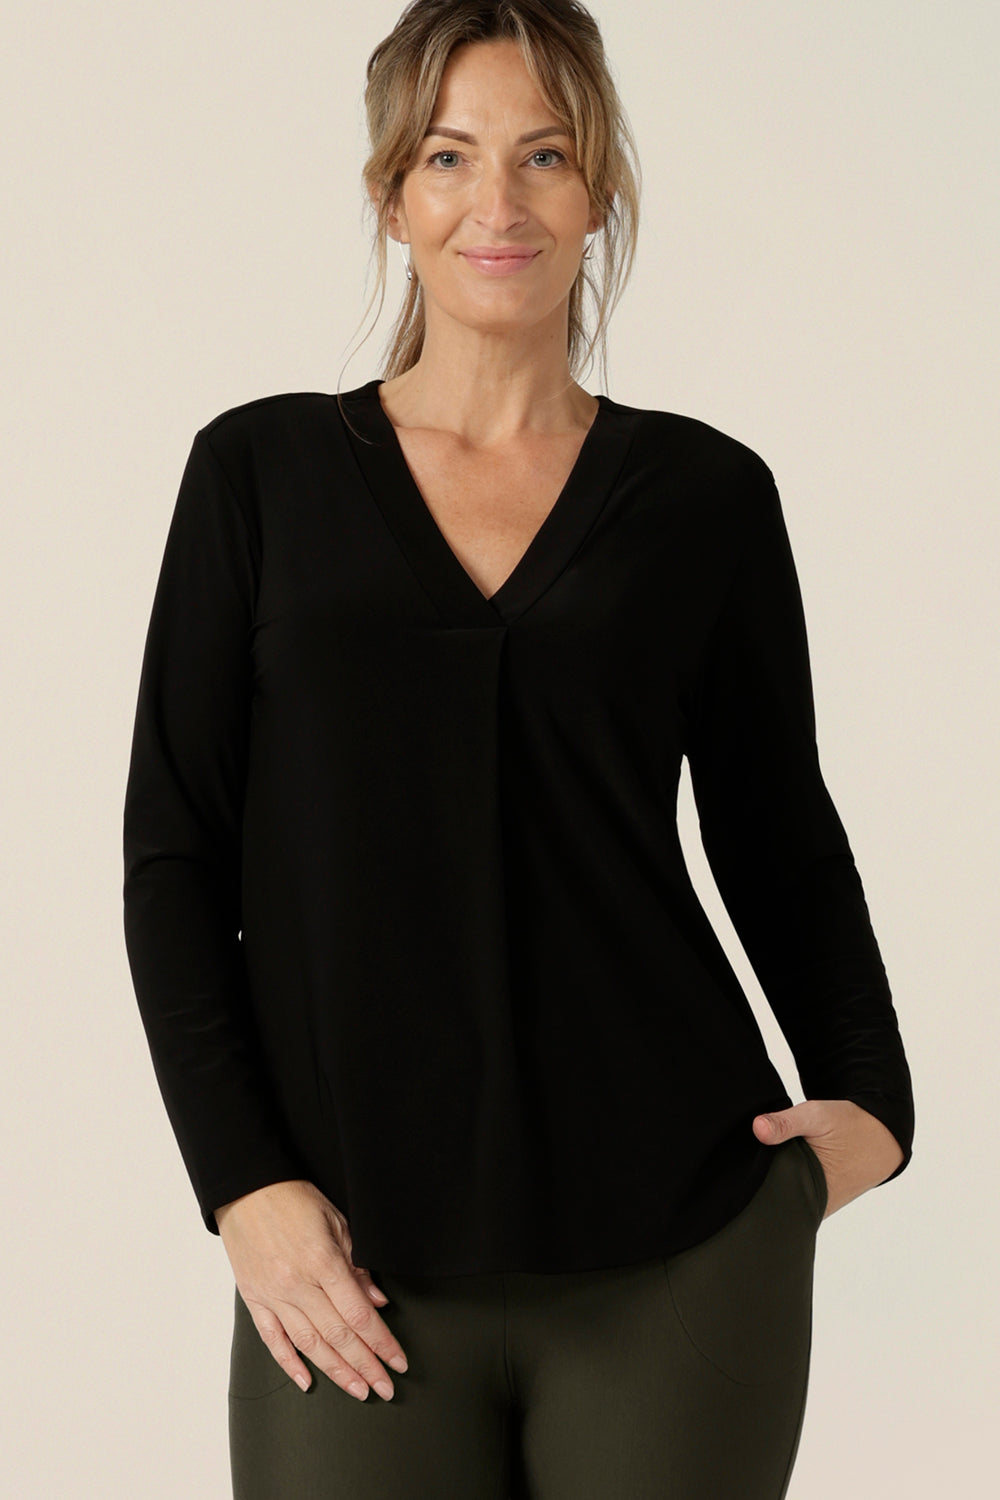 A size 10, 40 plus woman wears a long sleeve top with V-neck in black jersey. Made in Australia by Australian and New Zealand women's clothing label, L&F .